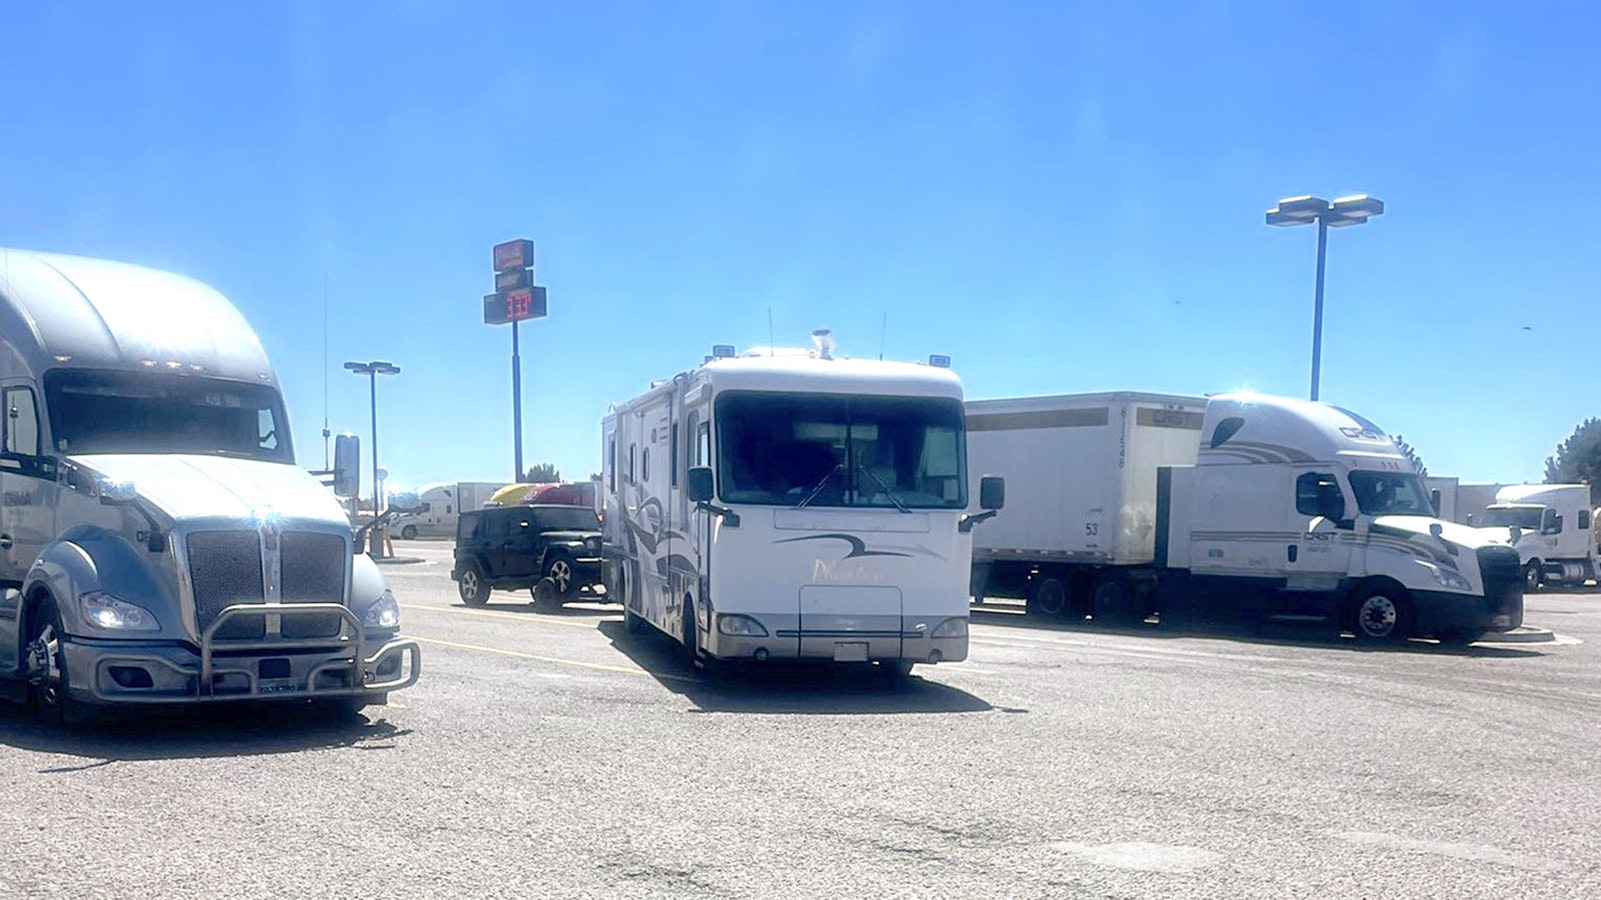 RV drivers taking up multiple spaces in truck stop parking lots is a top pet peeve for one long-haul trucker who talked with Cowboy State Daily.